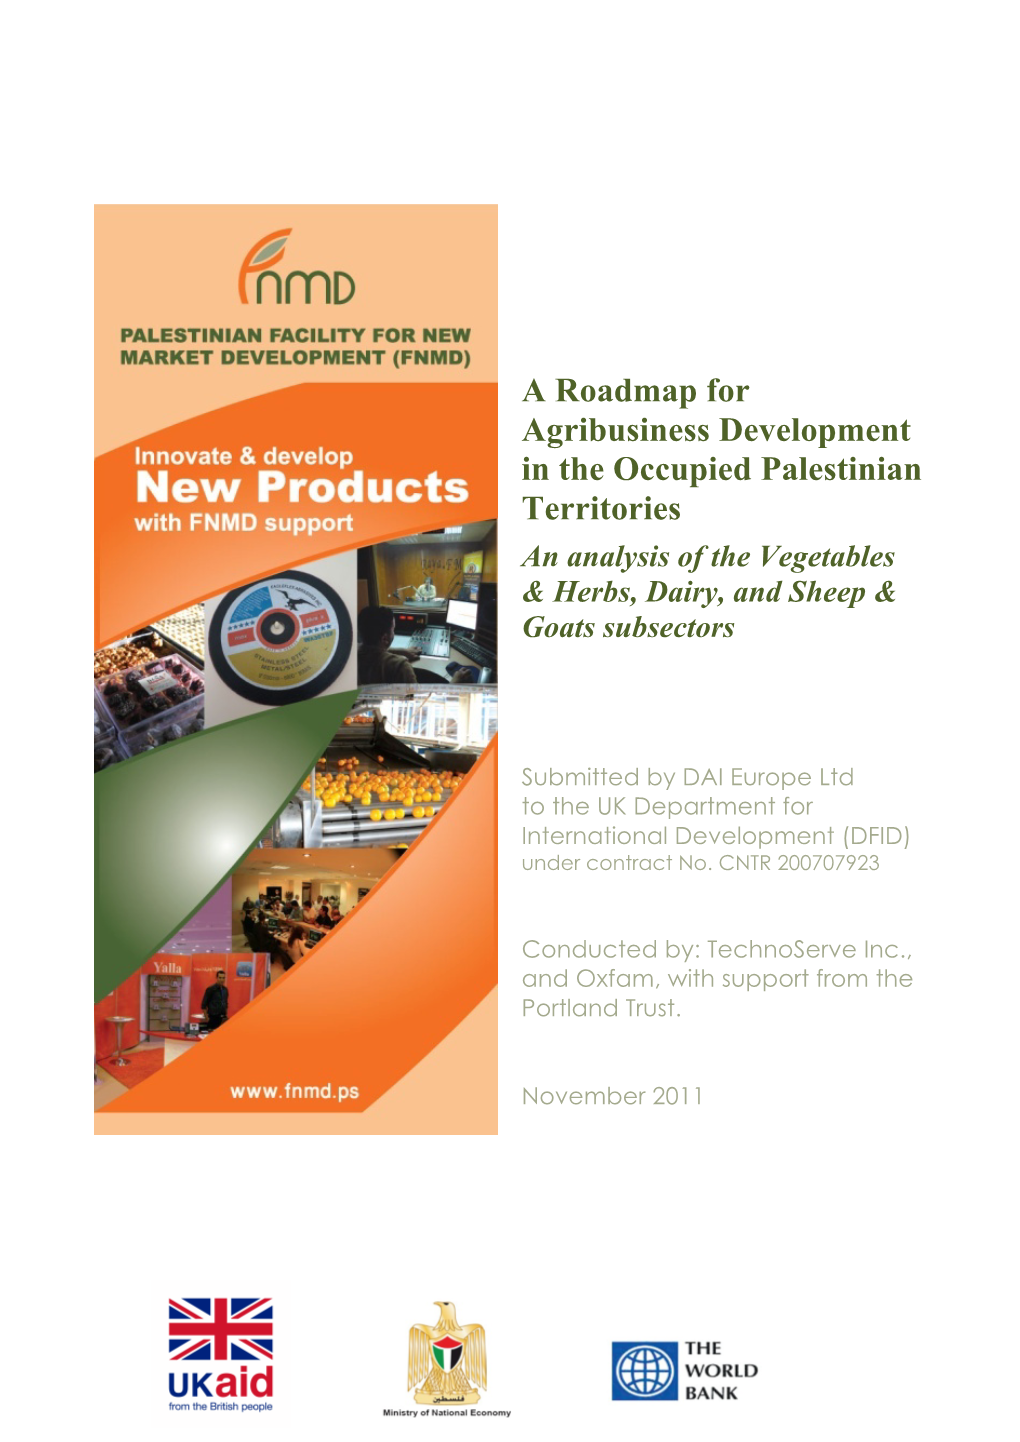 A Roadmap for Agribusiness Development in the Occupied Palestinian Territories an Analysis of the Vegetables & Herbs, Dairy, and Sheep & Goats Subsectors